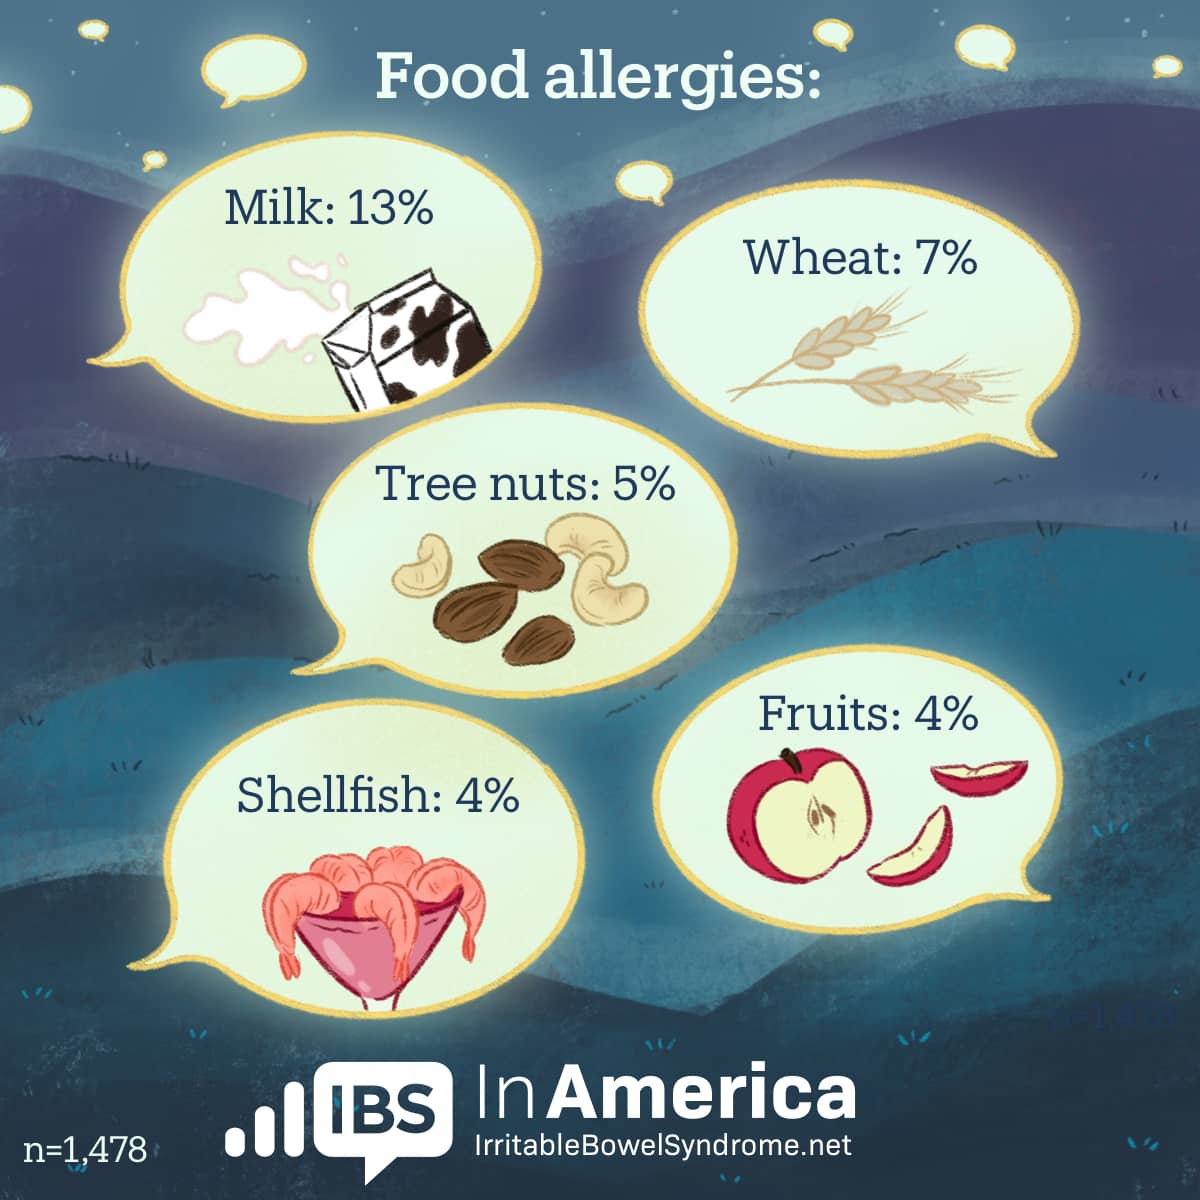 Food allergies, including milk, wheat, tree nuts, and shellfish are in speech bubbles. 